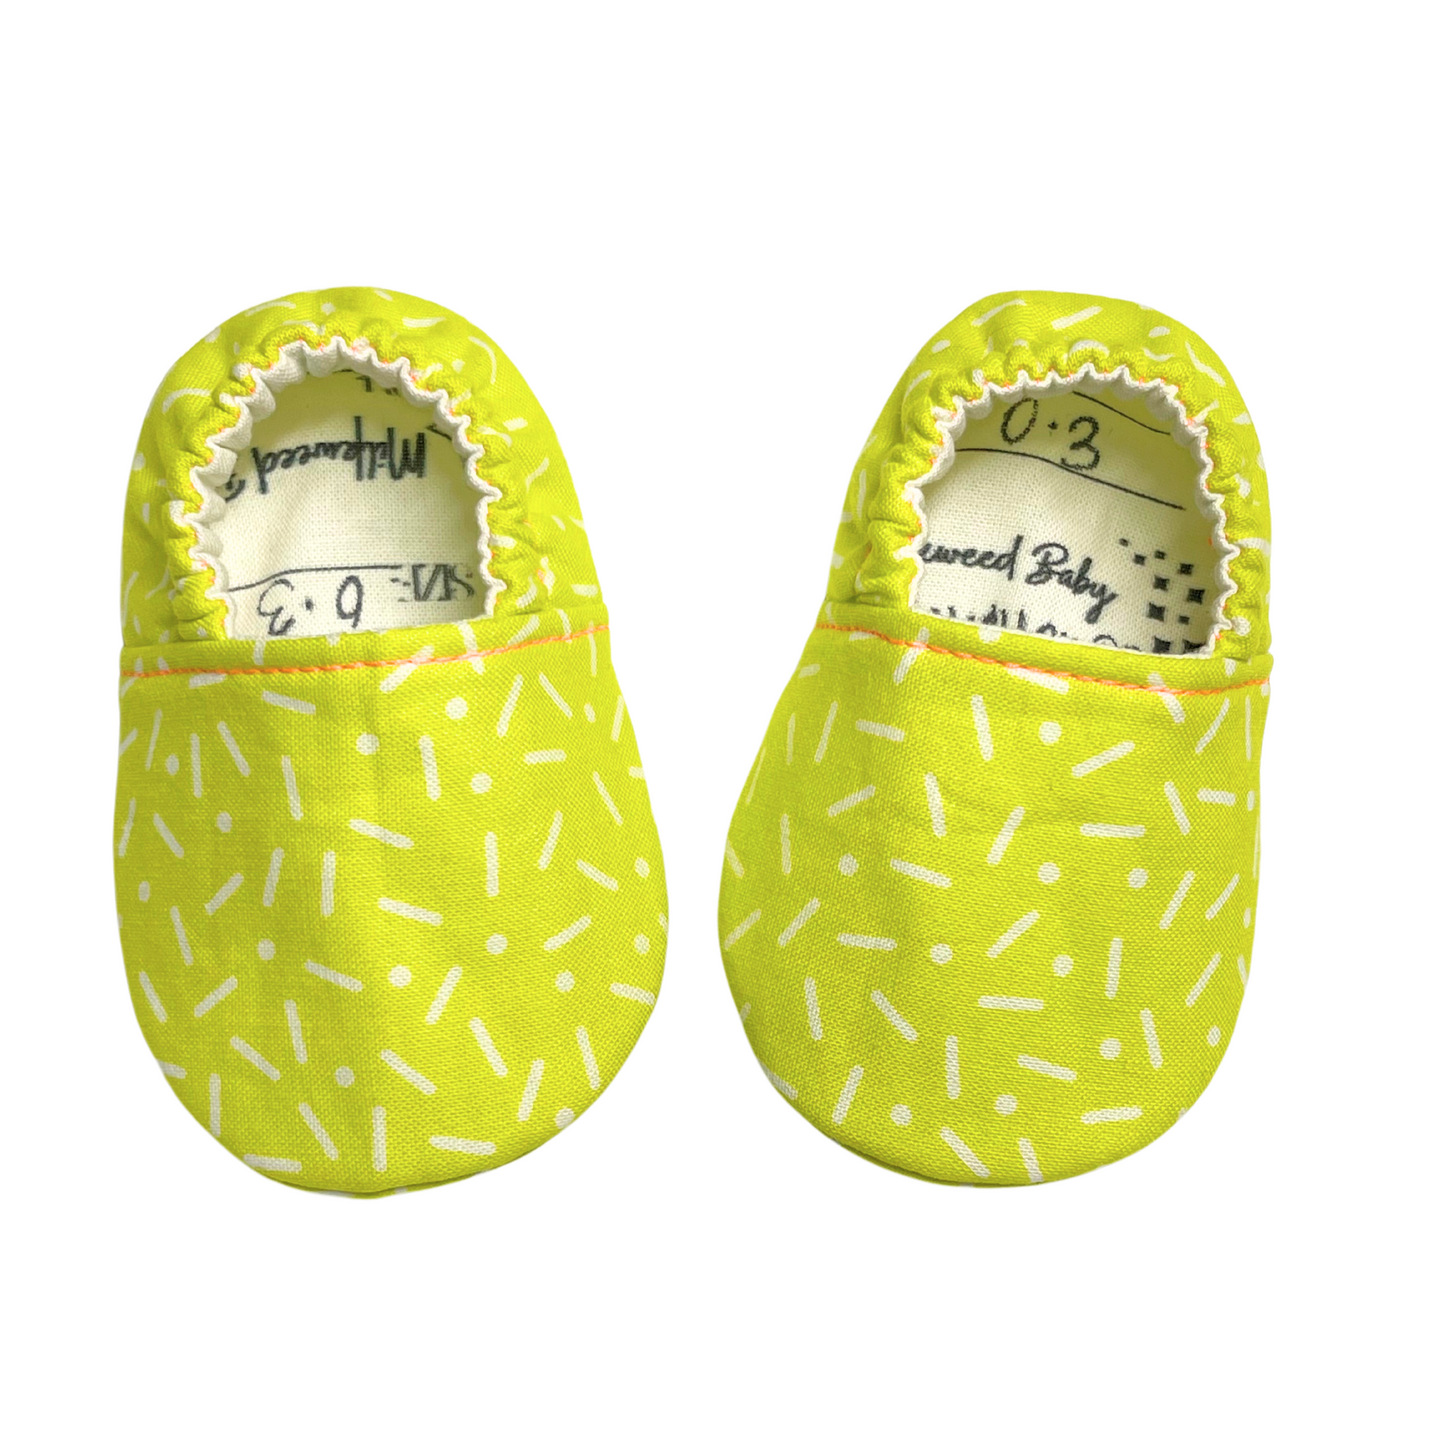 Ready to Ship! Neon Yellow Soft Sole Baby Shoes | Cheerful Sprinkle Design